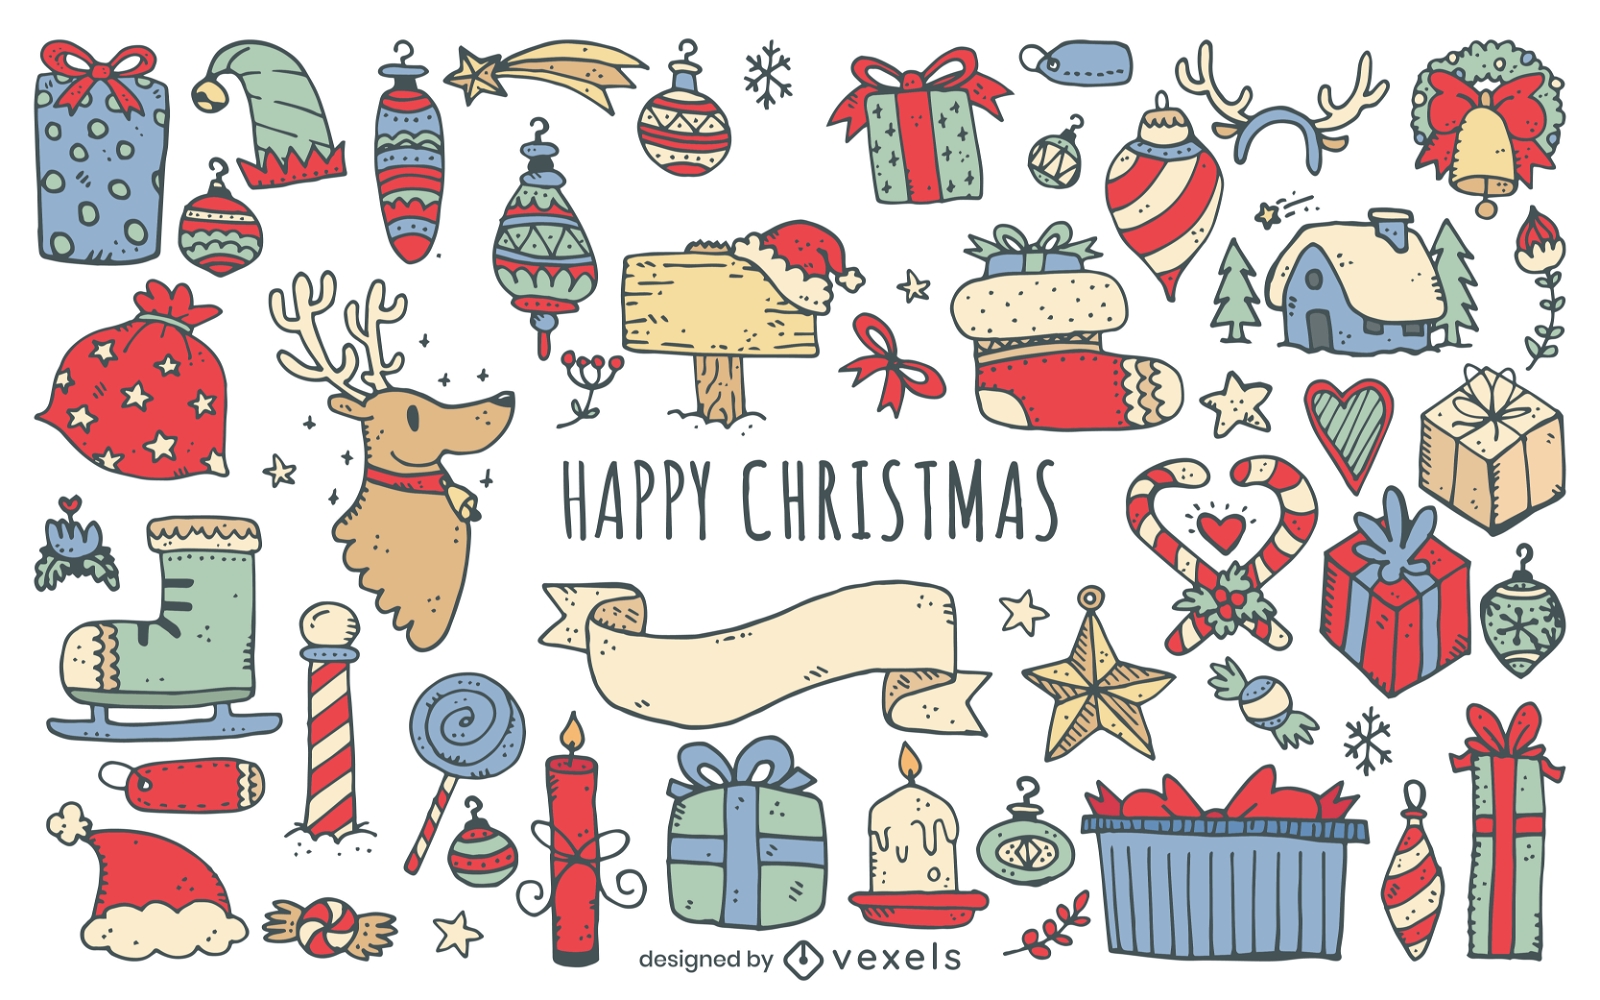 Merry Christmas doodles collection